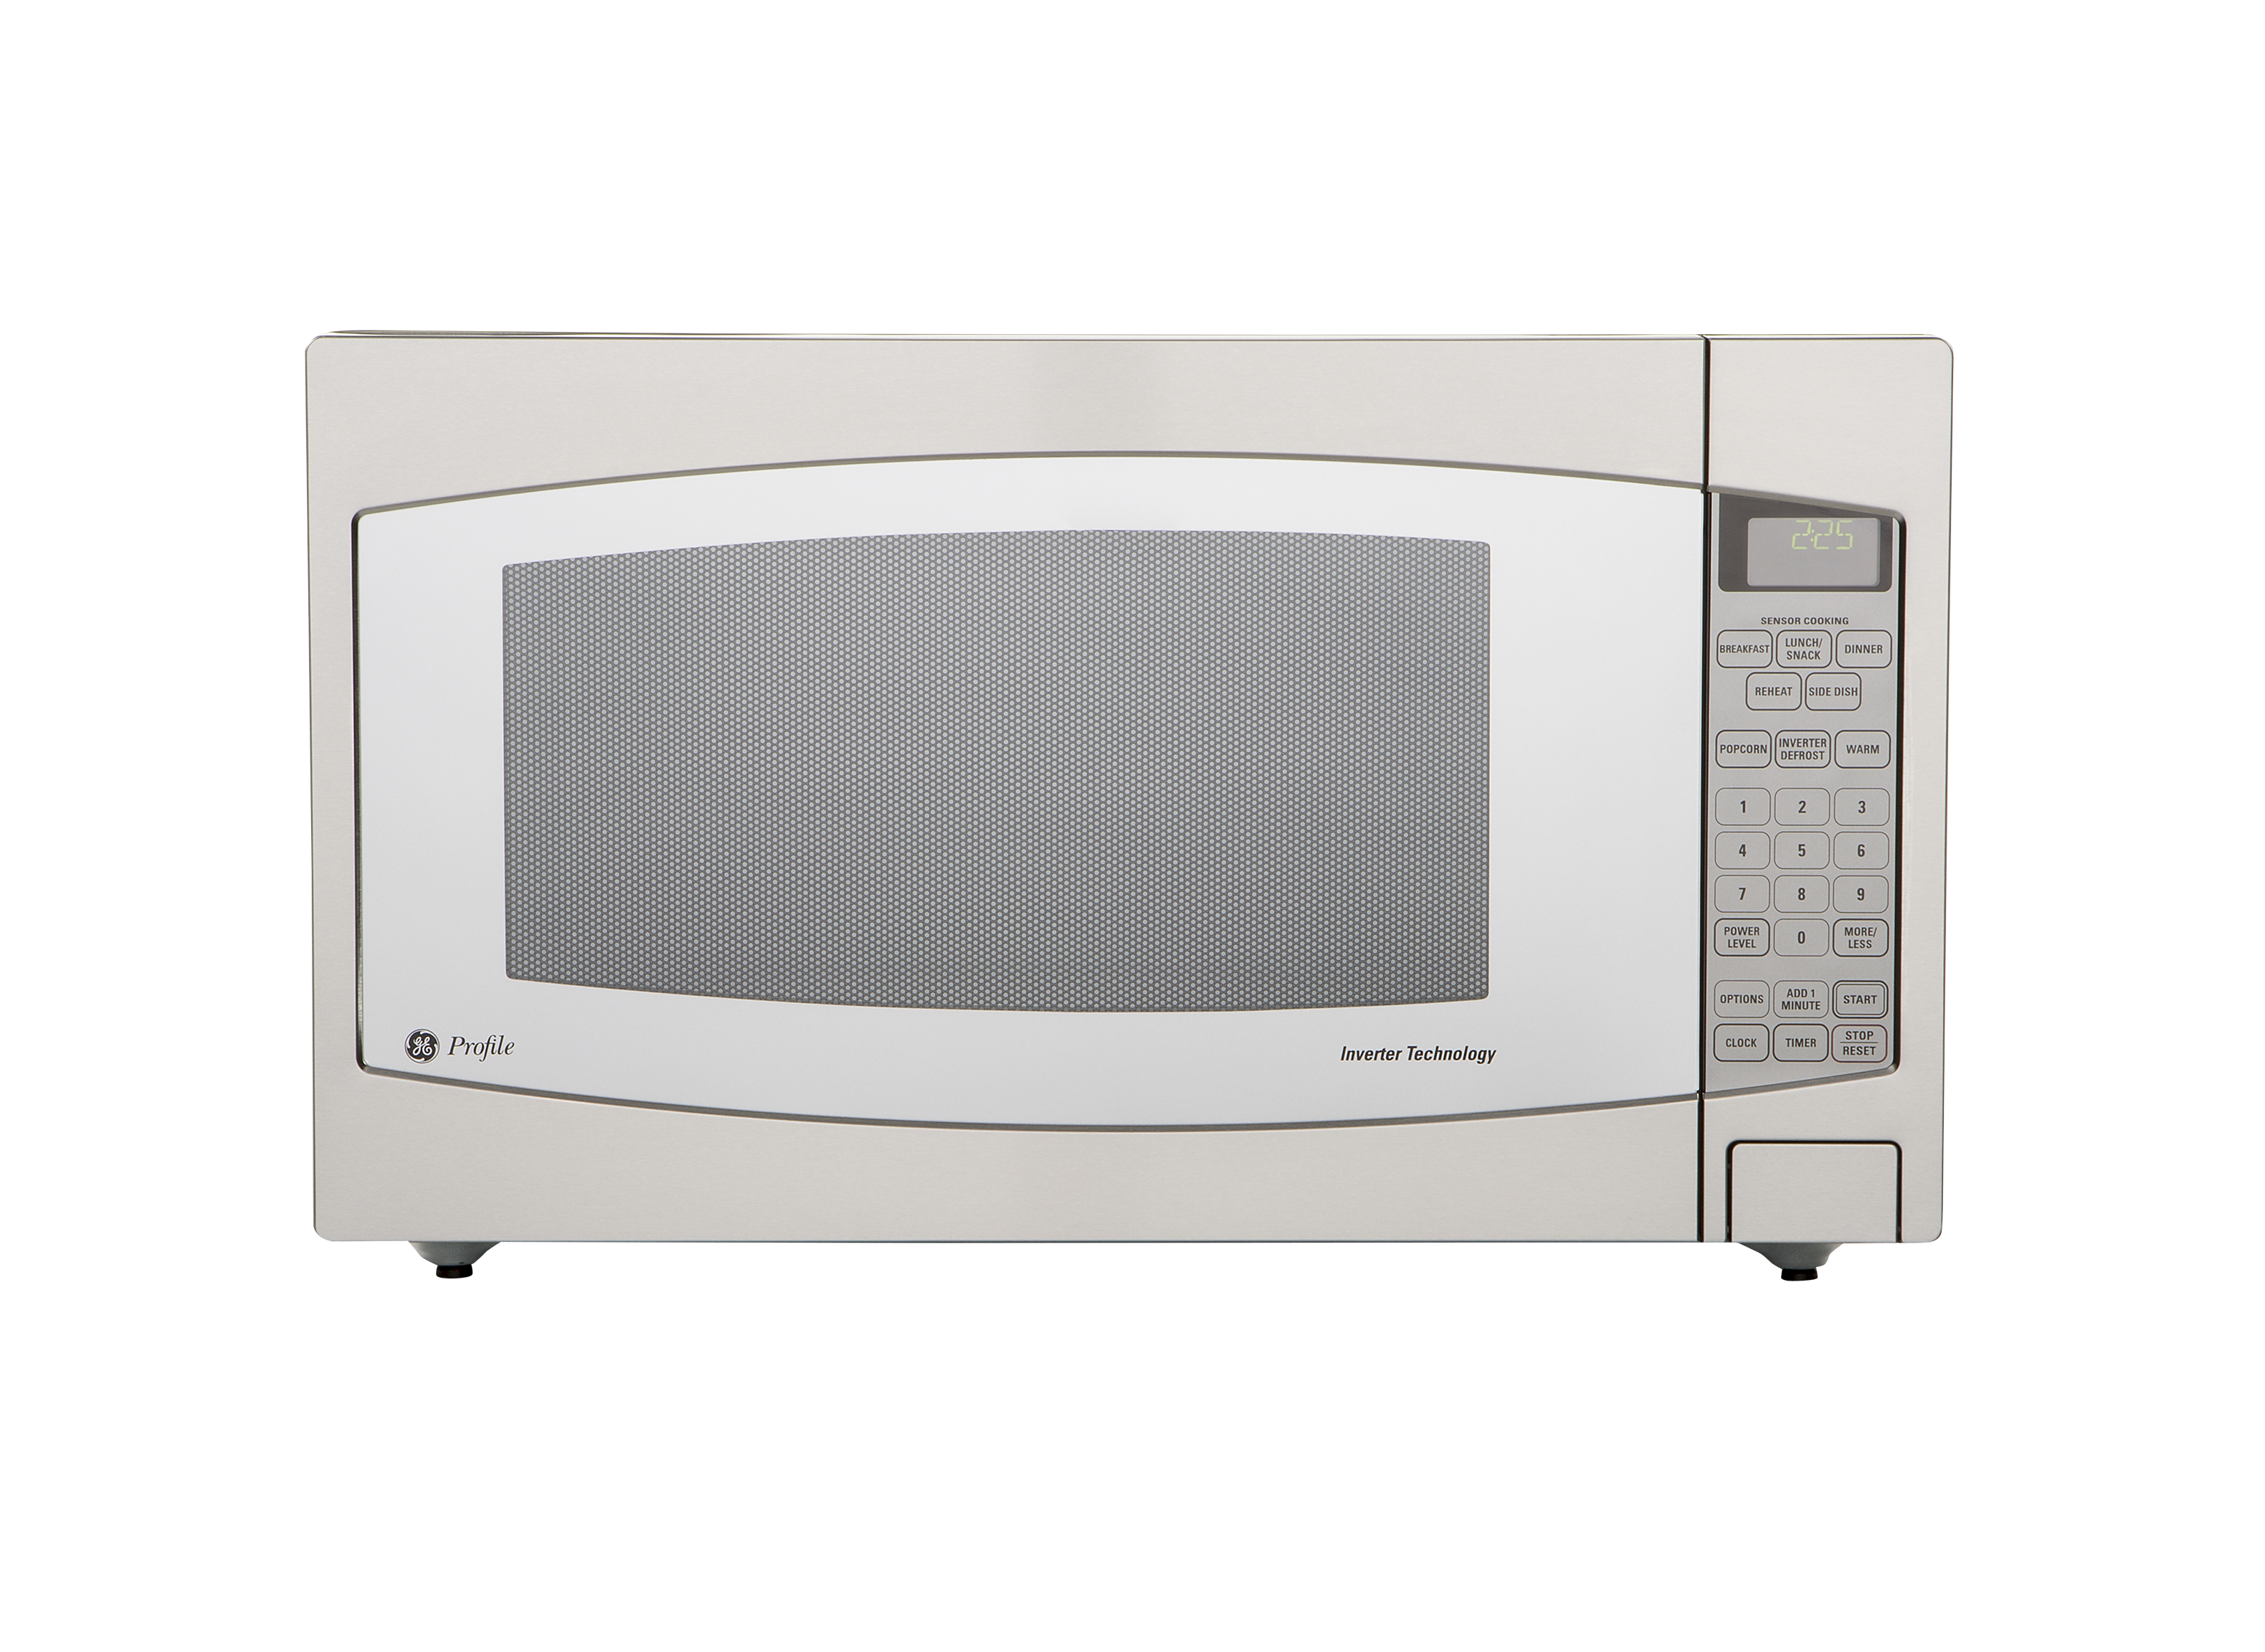 GE Profile JES2251SJ Microwave Oven Review - Consumer Reports